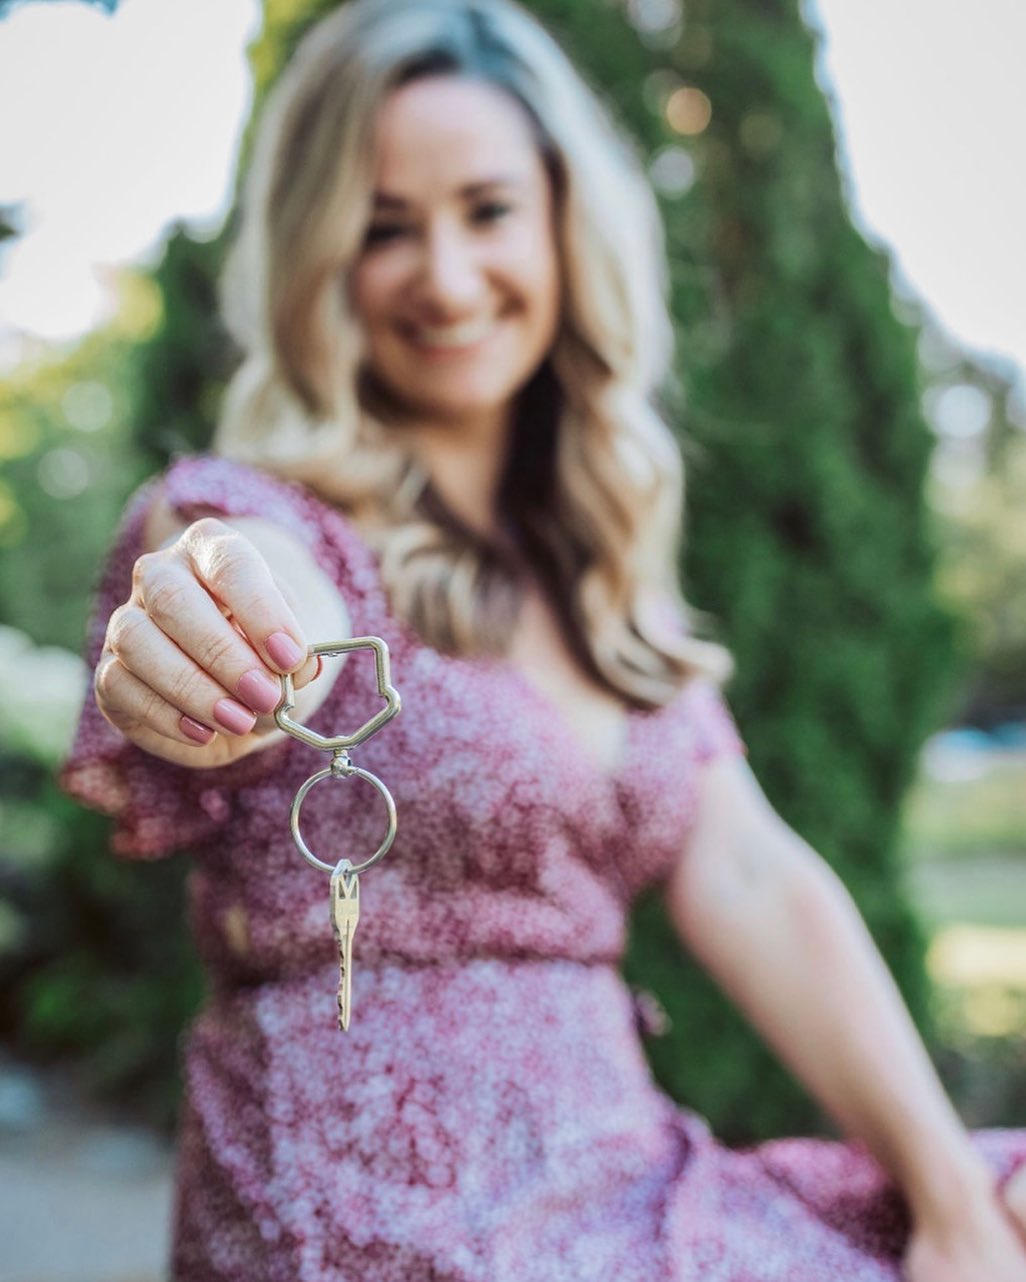 Woman Holding a House Key. Photo by Instagram user @courtmcmahon_realestate